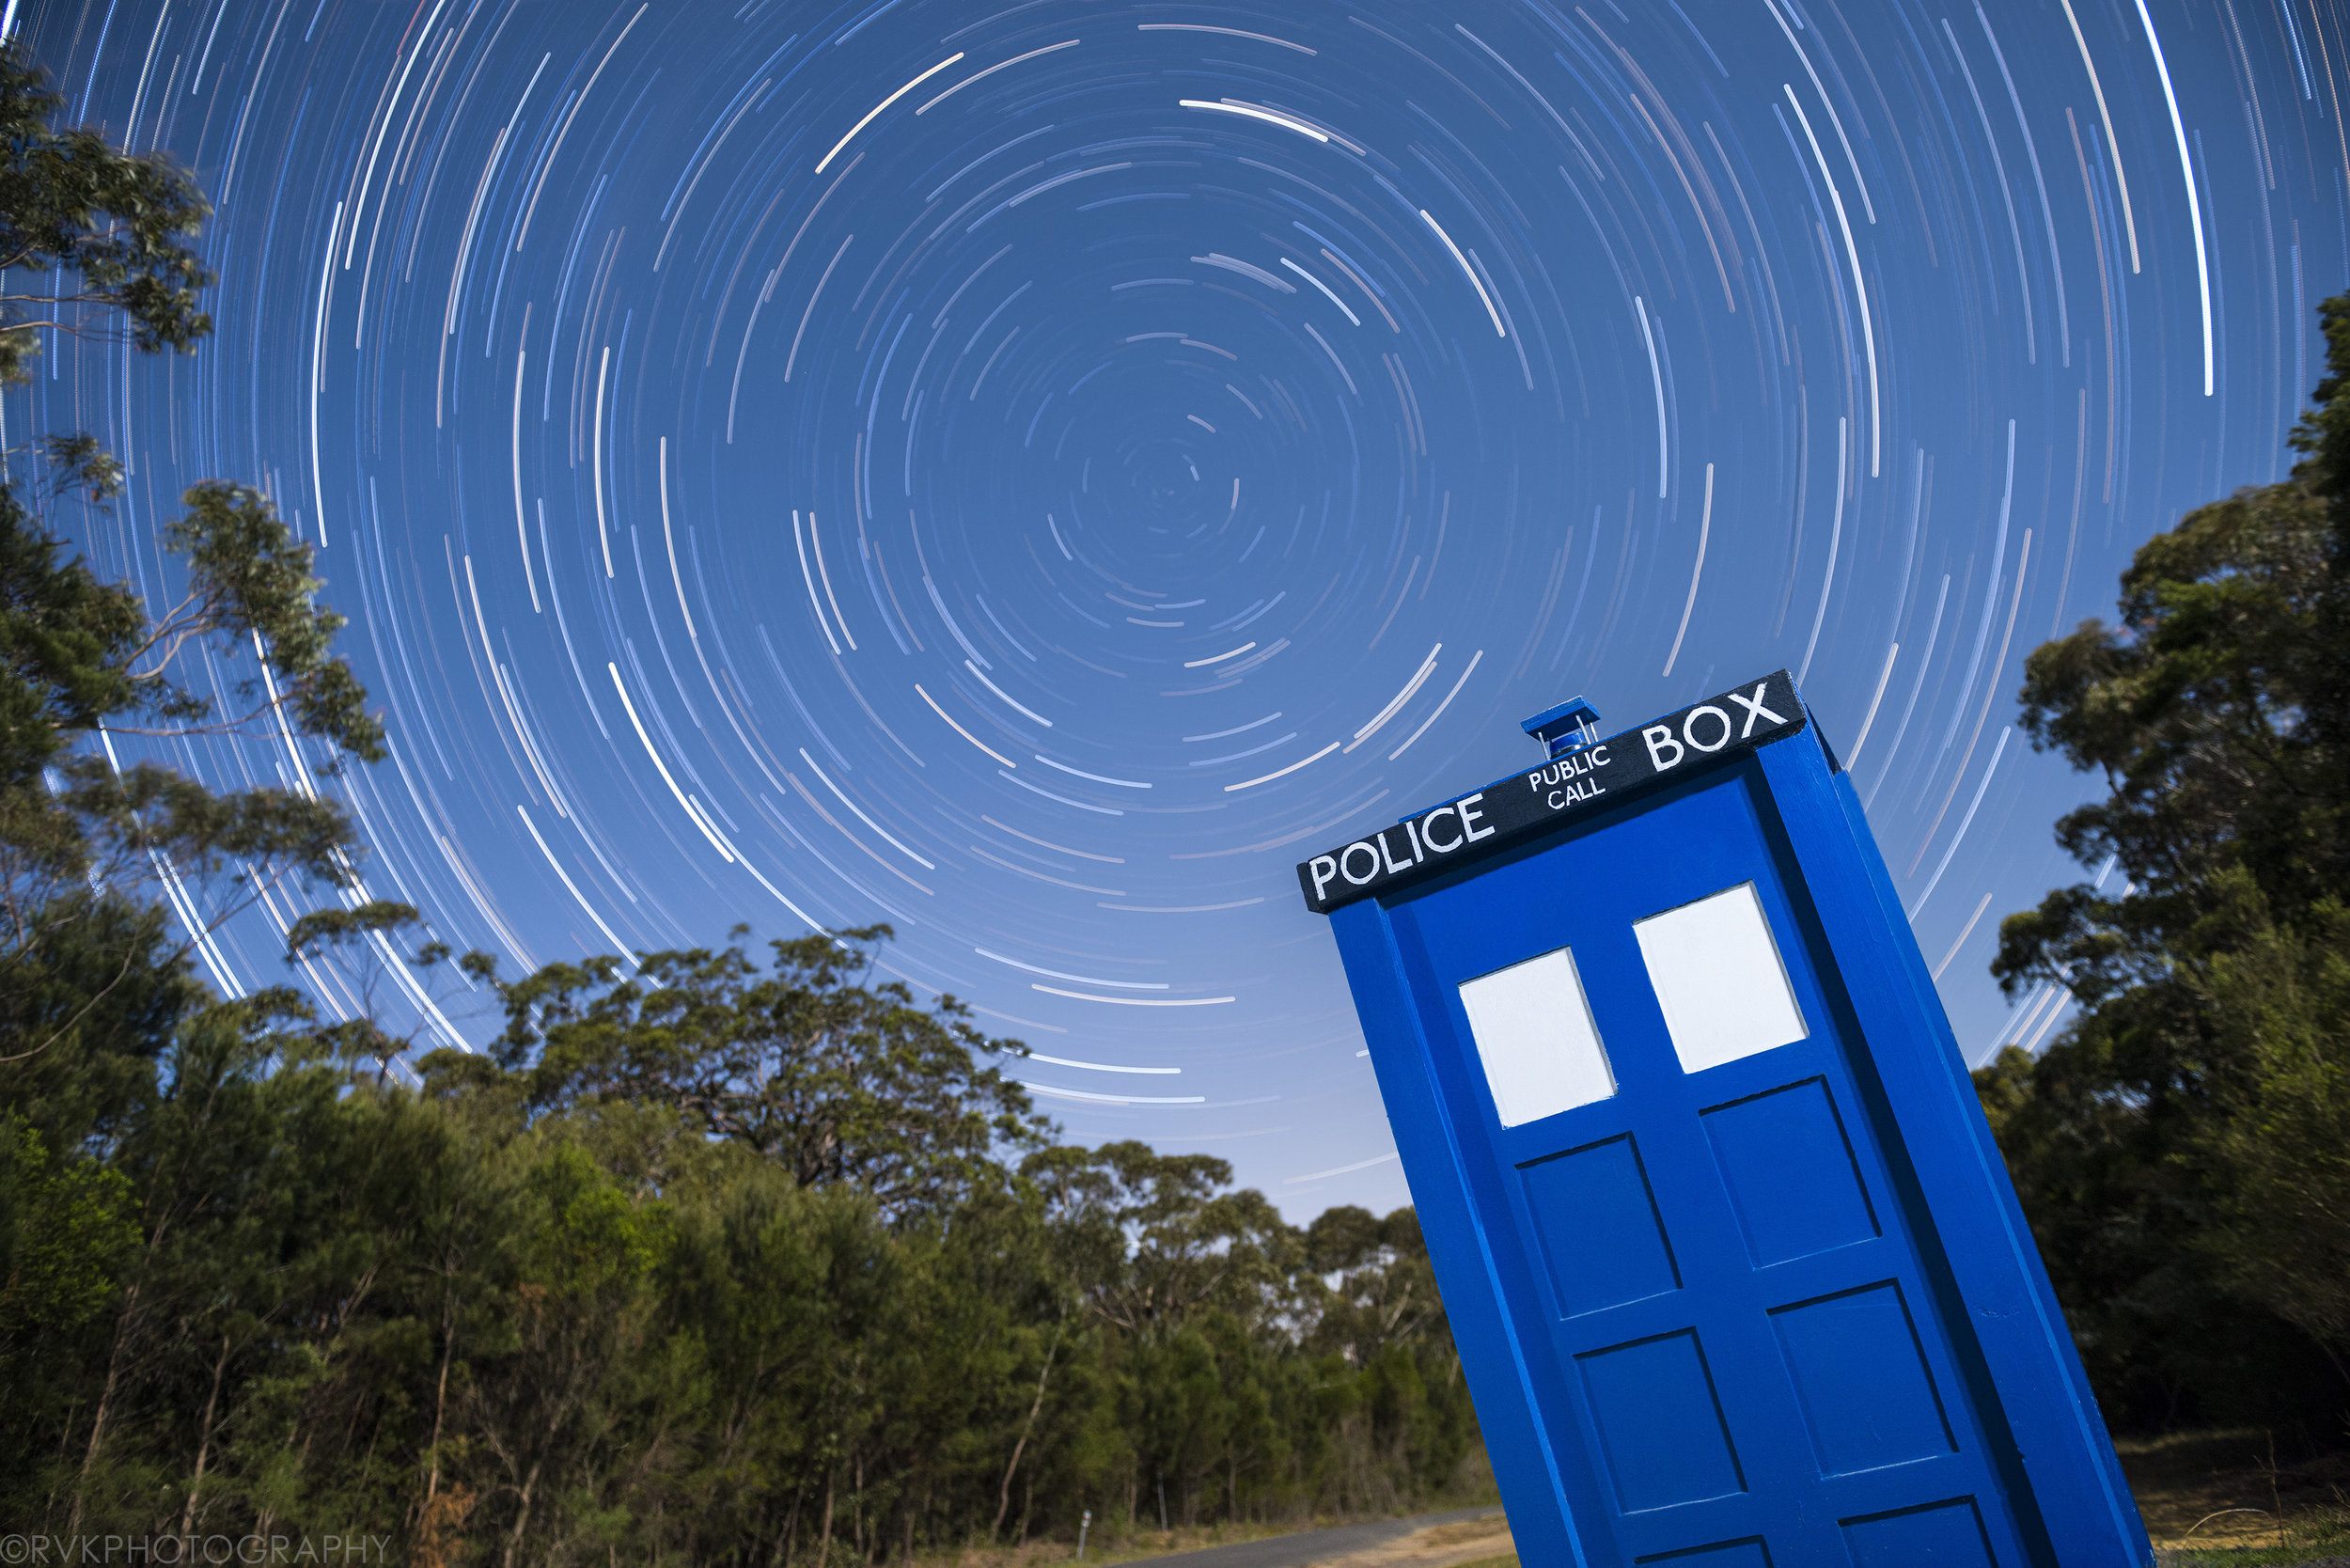 The night sky is filled with the swirls of star trails, and the foreground has a bright blue TARDIS police box